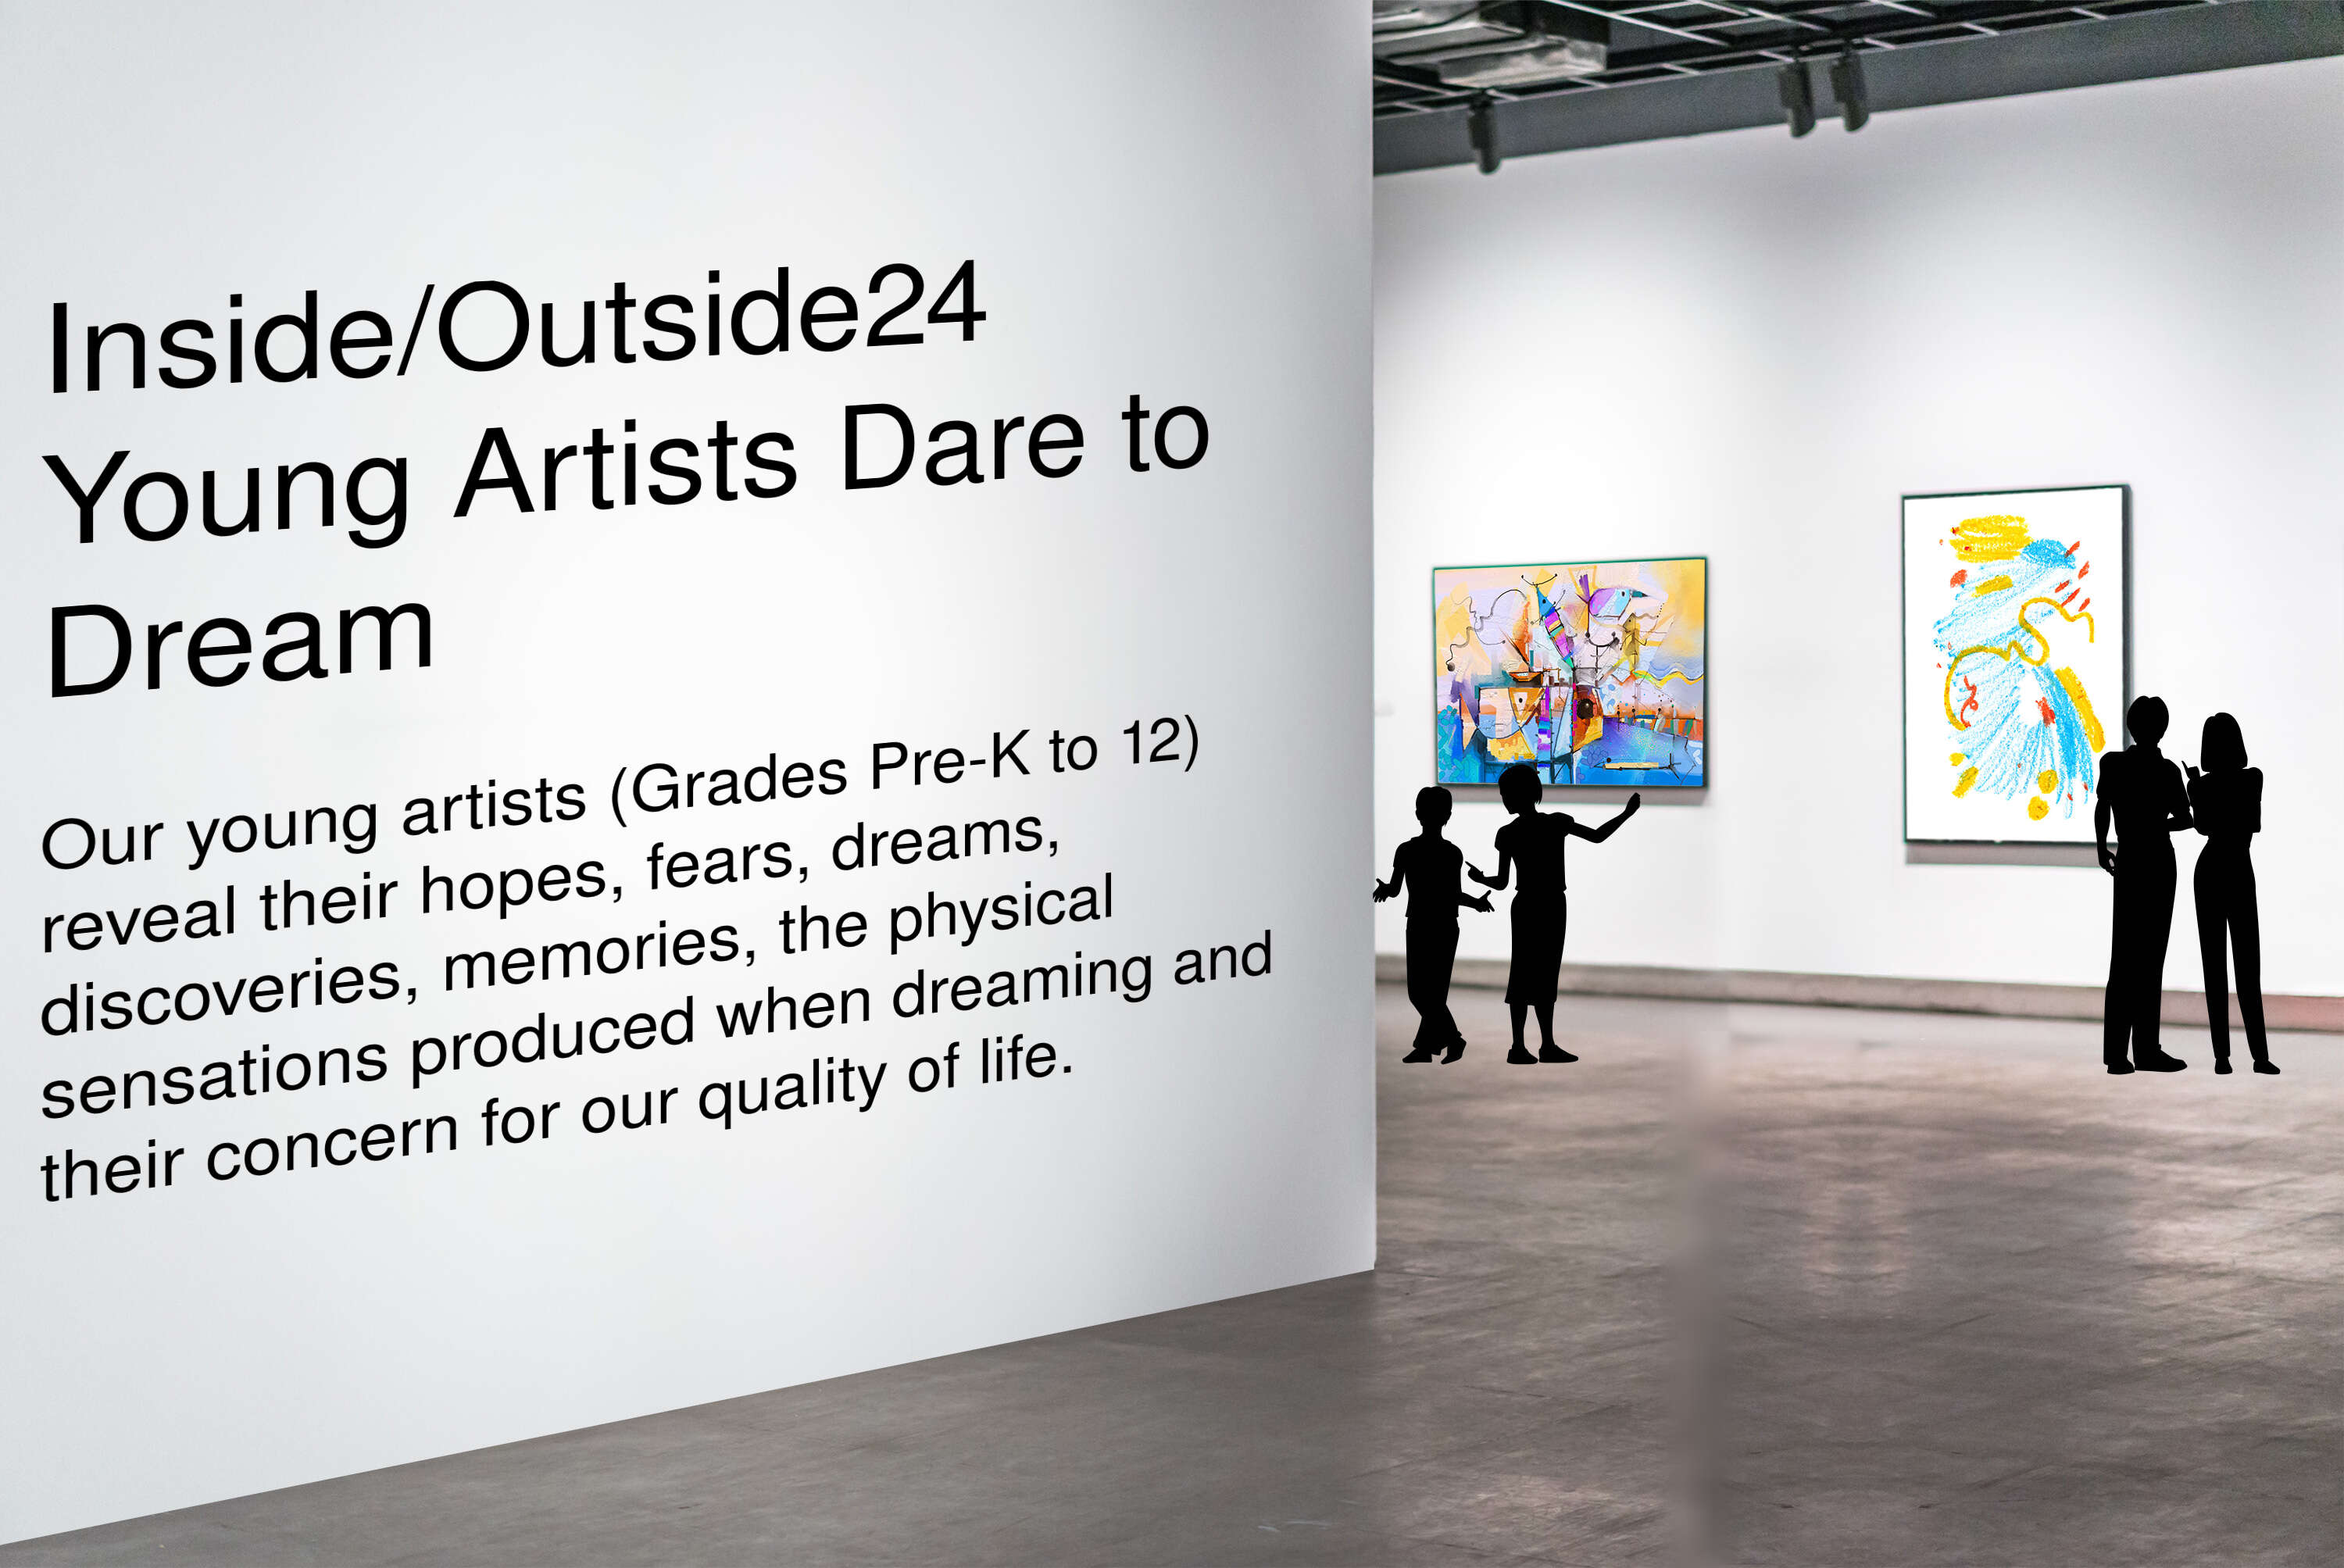 Inside/Outside24 Young Artists Dare to Dream